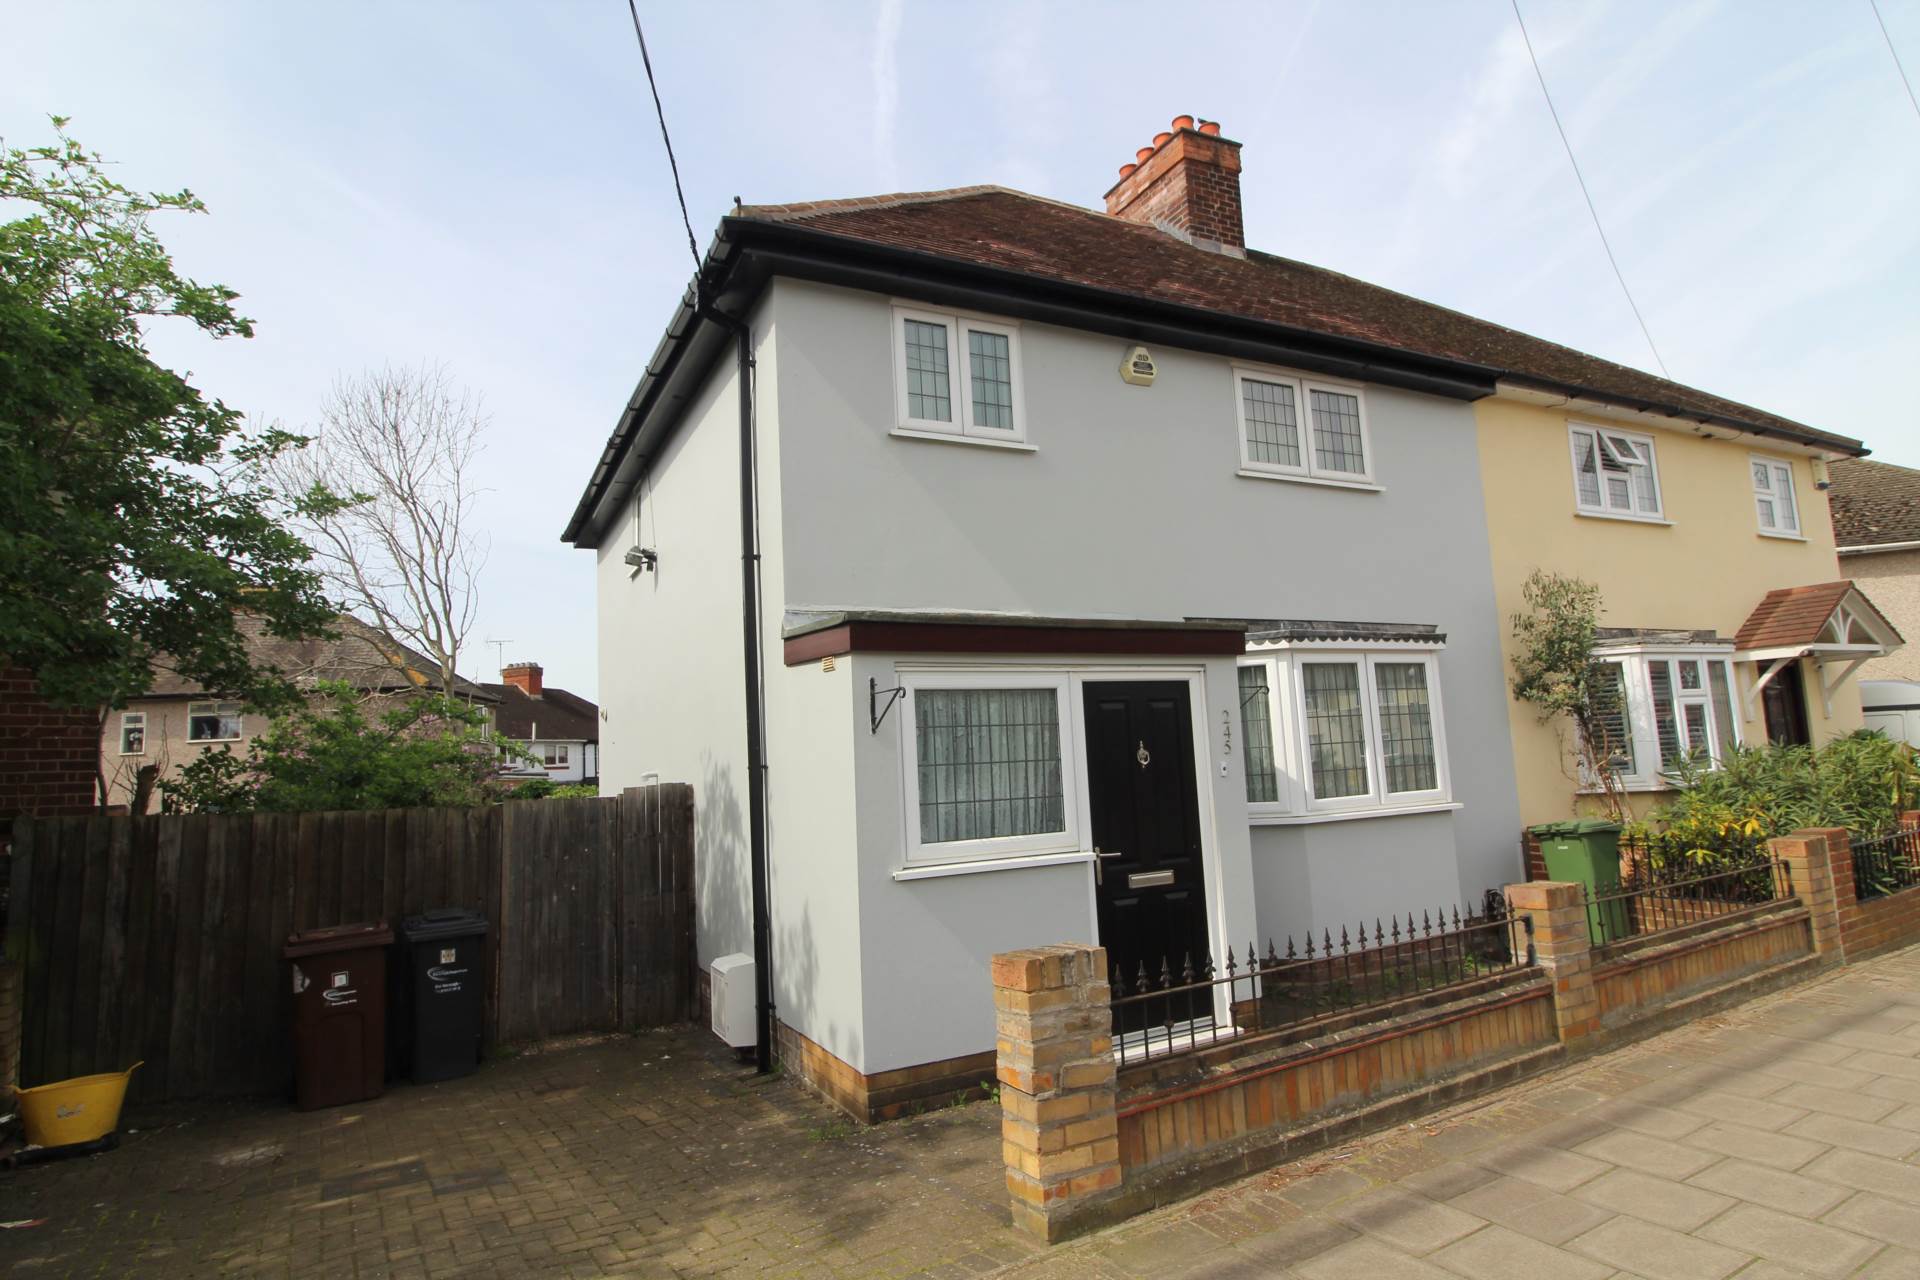 3 bed Semi-Detached House for rent in Dagenham. From Bryants Estate Agents